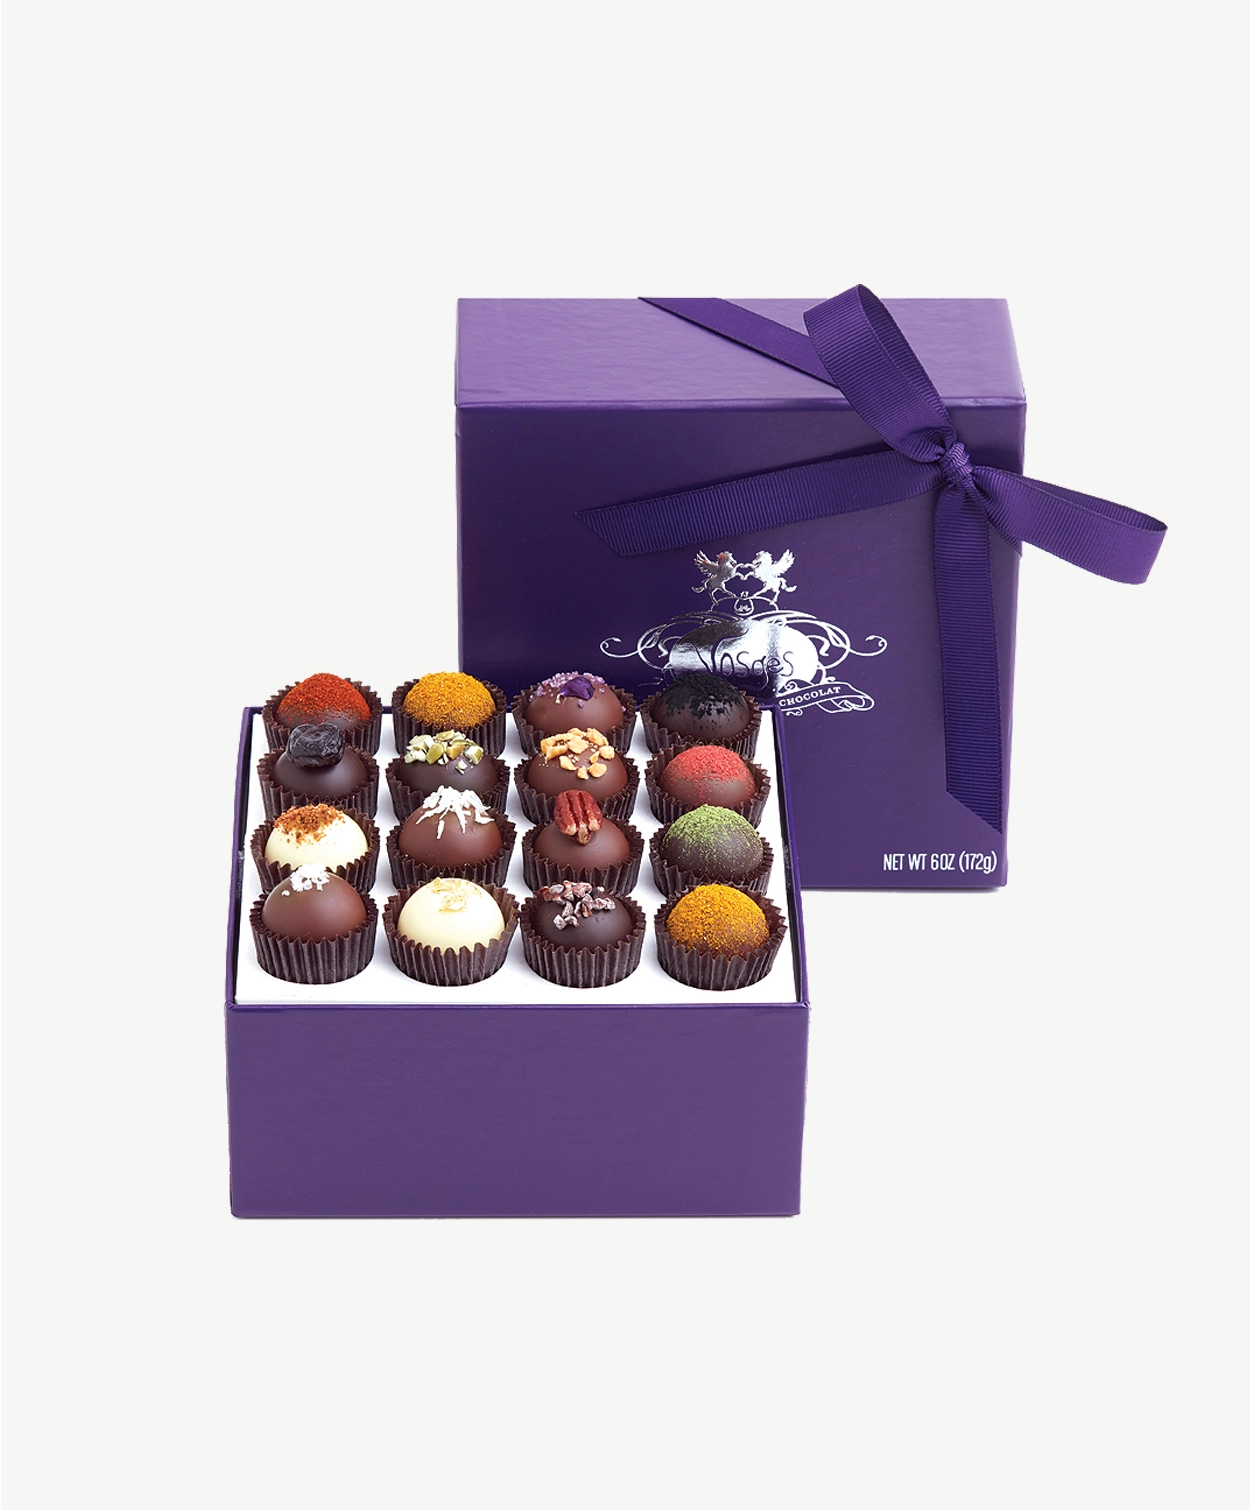 Open box of Vosges Haut-Chocolat Exotic Chocolate Truffles dusted with colorful toppings.